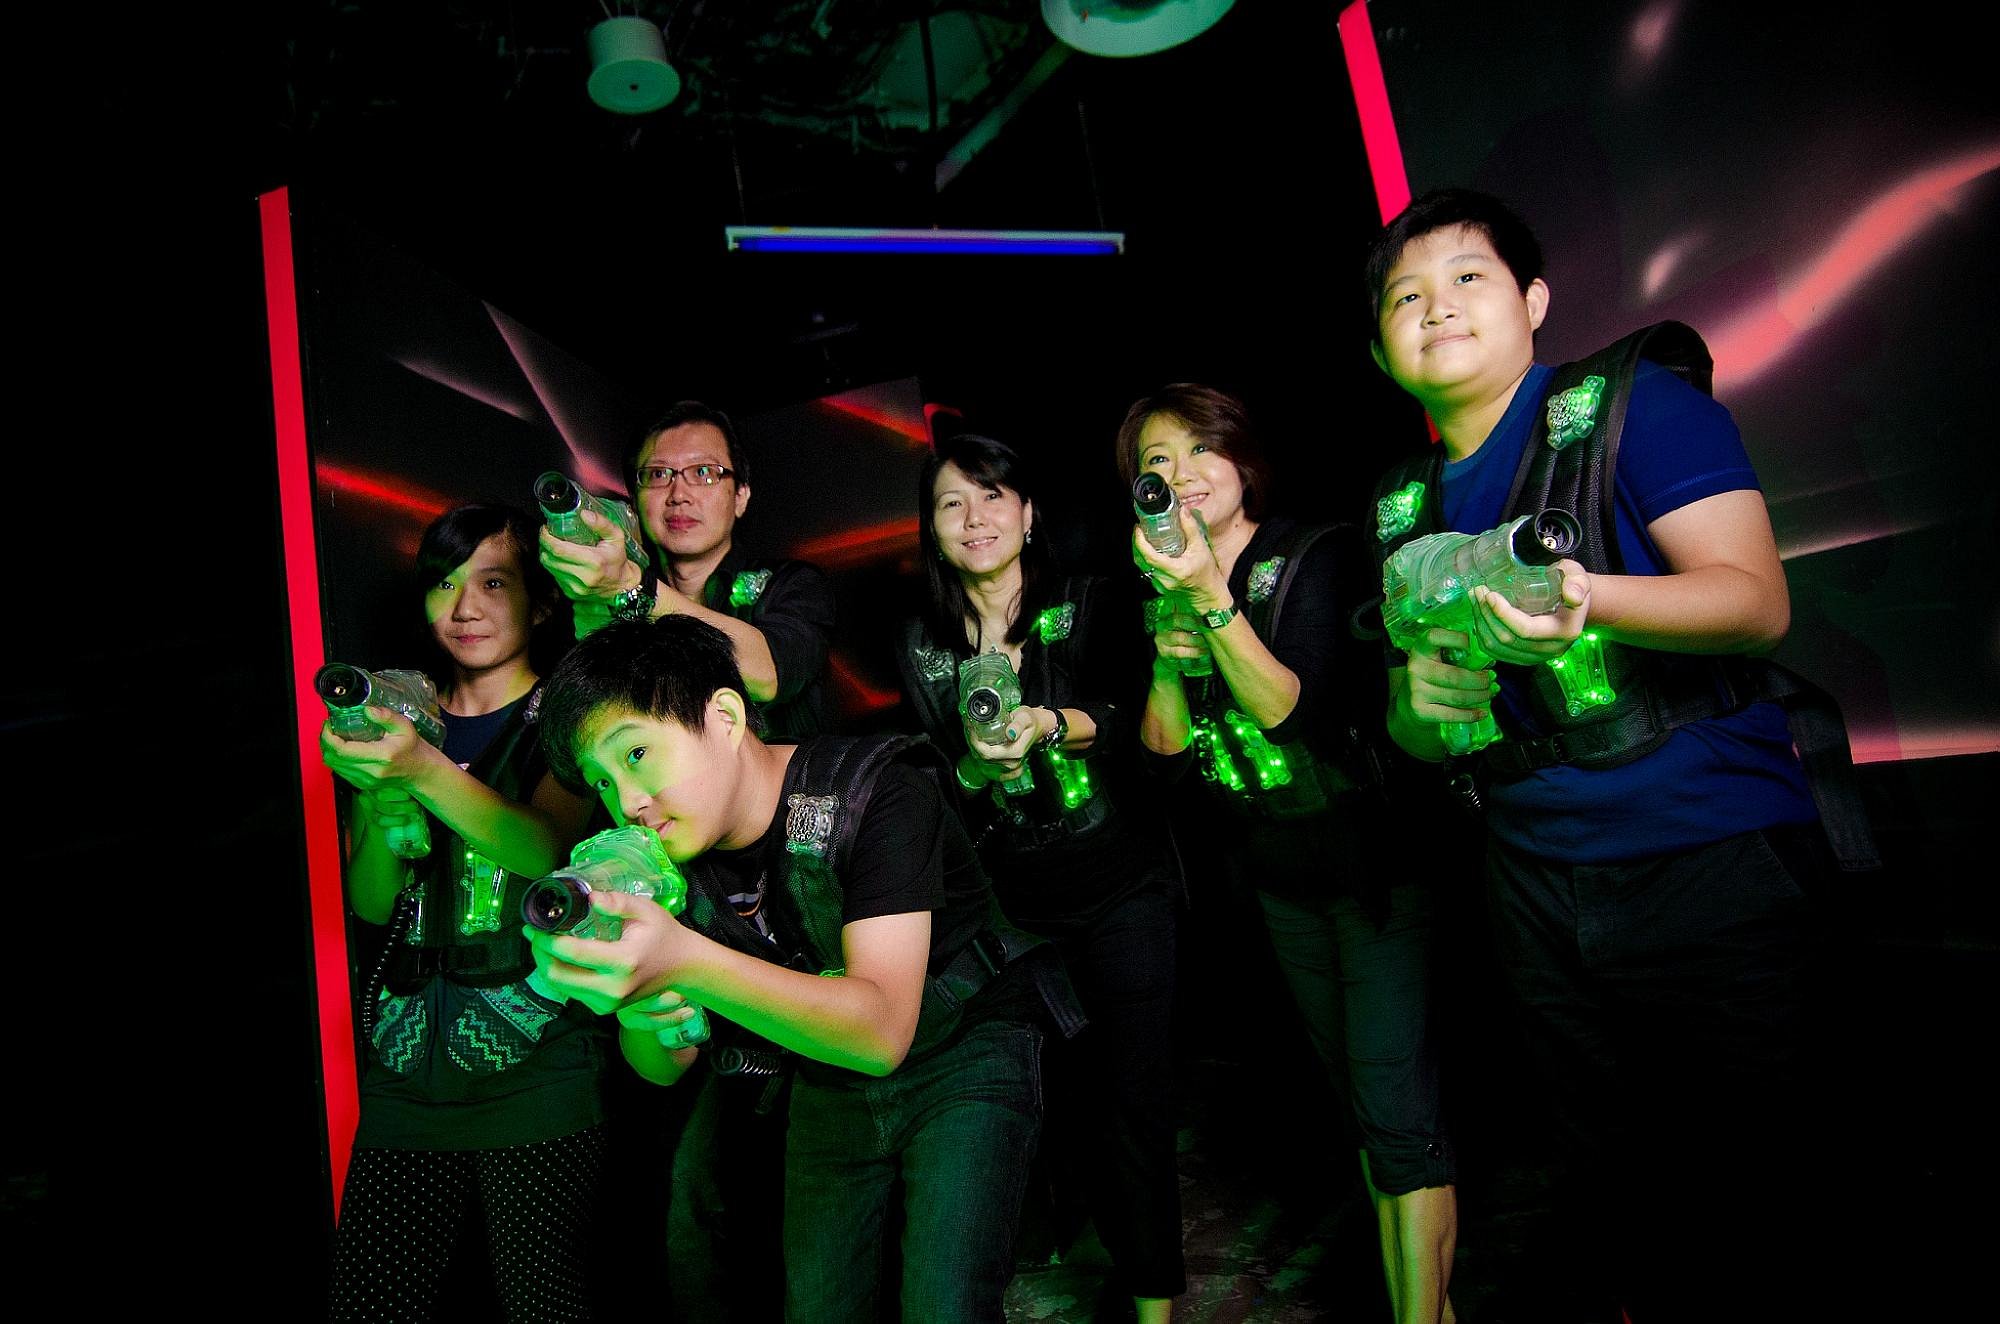 Dhoby Gaut Guide  - LaserOPS indoor laser tag venue in Singapore